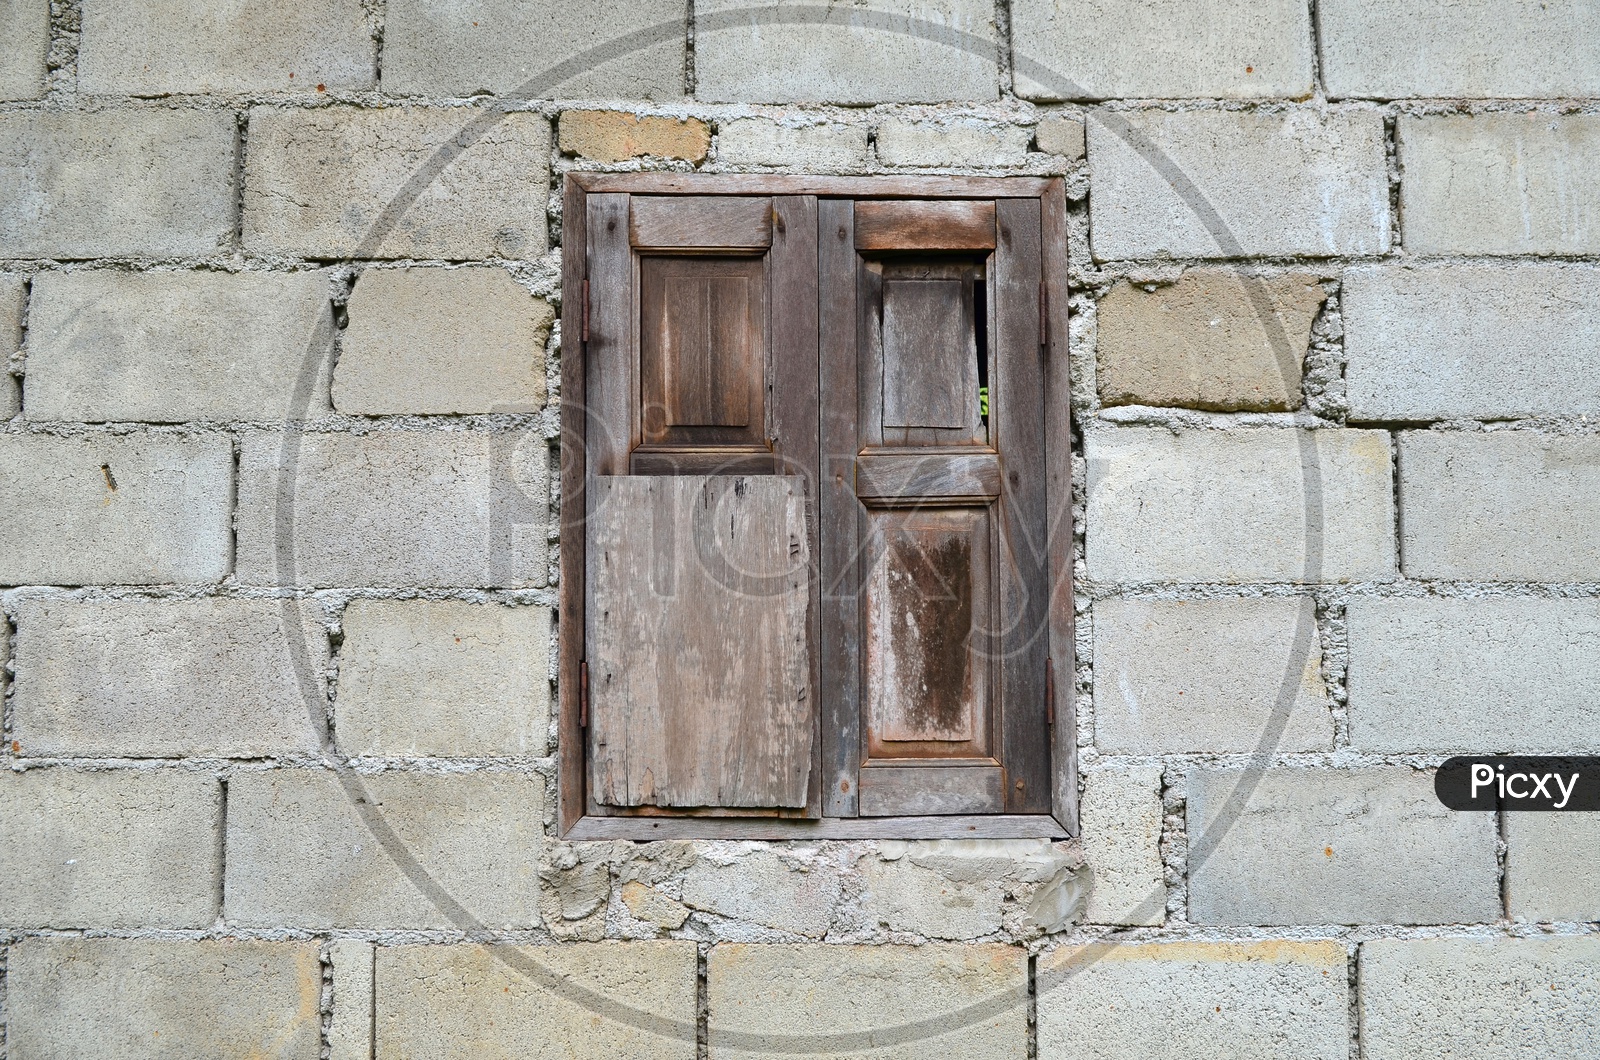 Traditional Wooden Window Over a Stone Wall